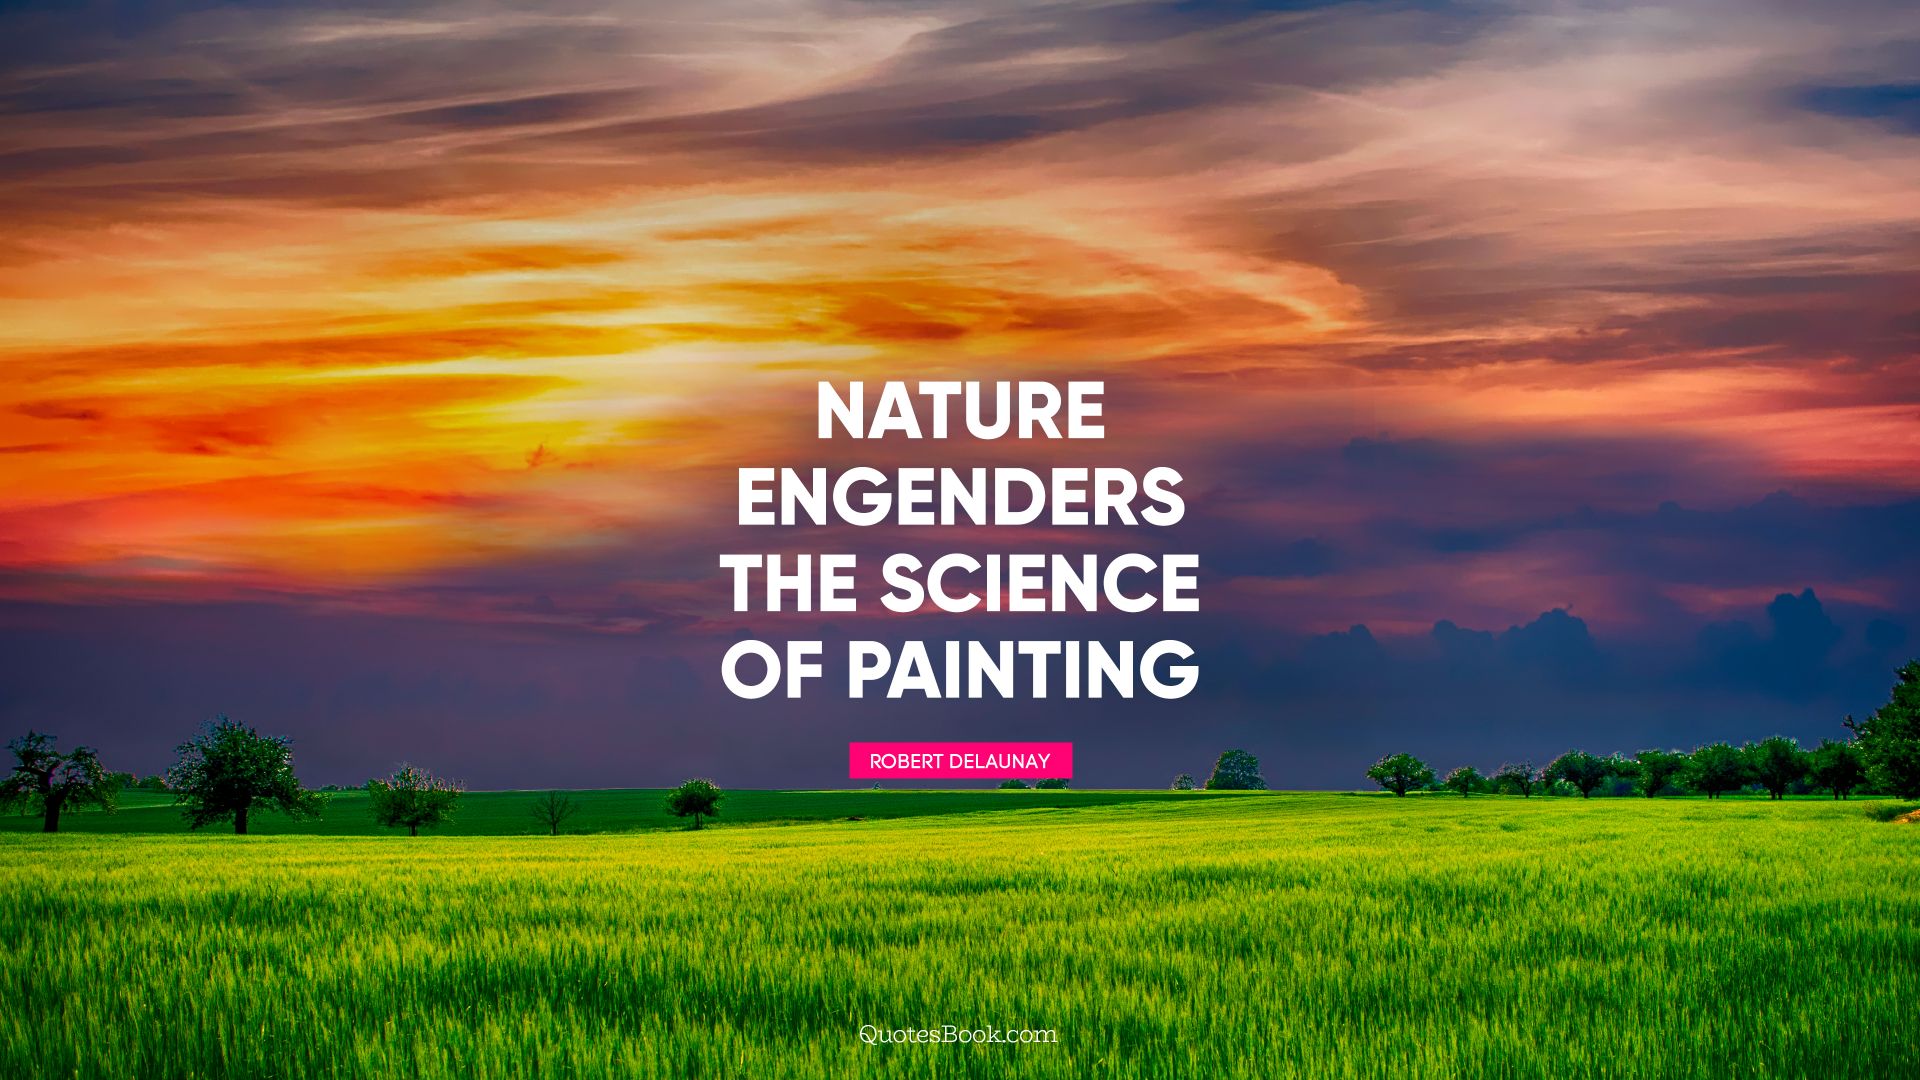 Nature engenders the science of painting. - Quote by Robert Delaunay